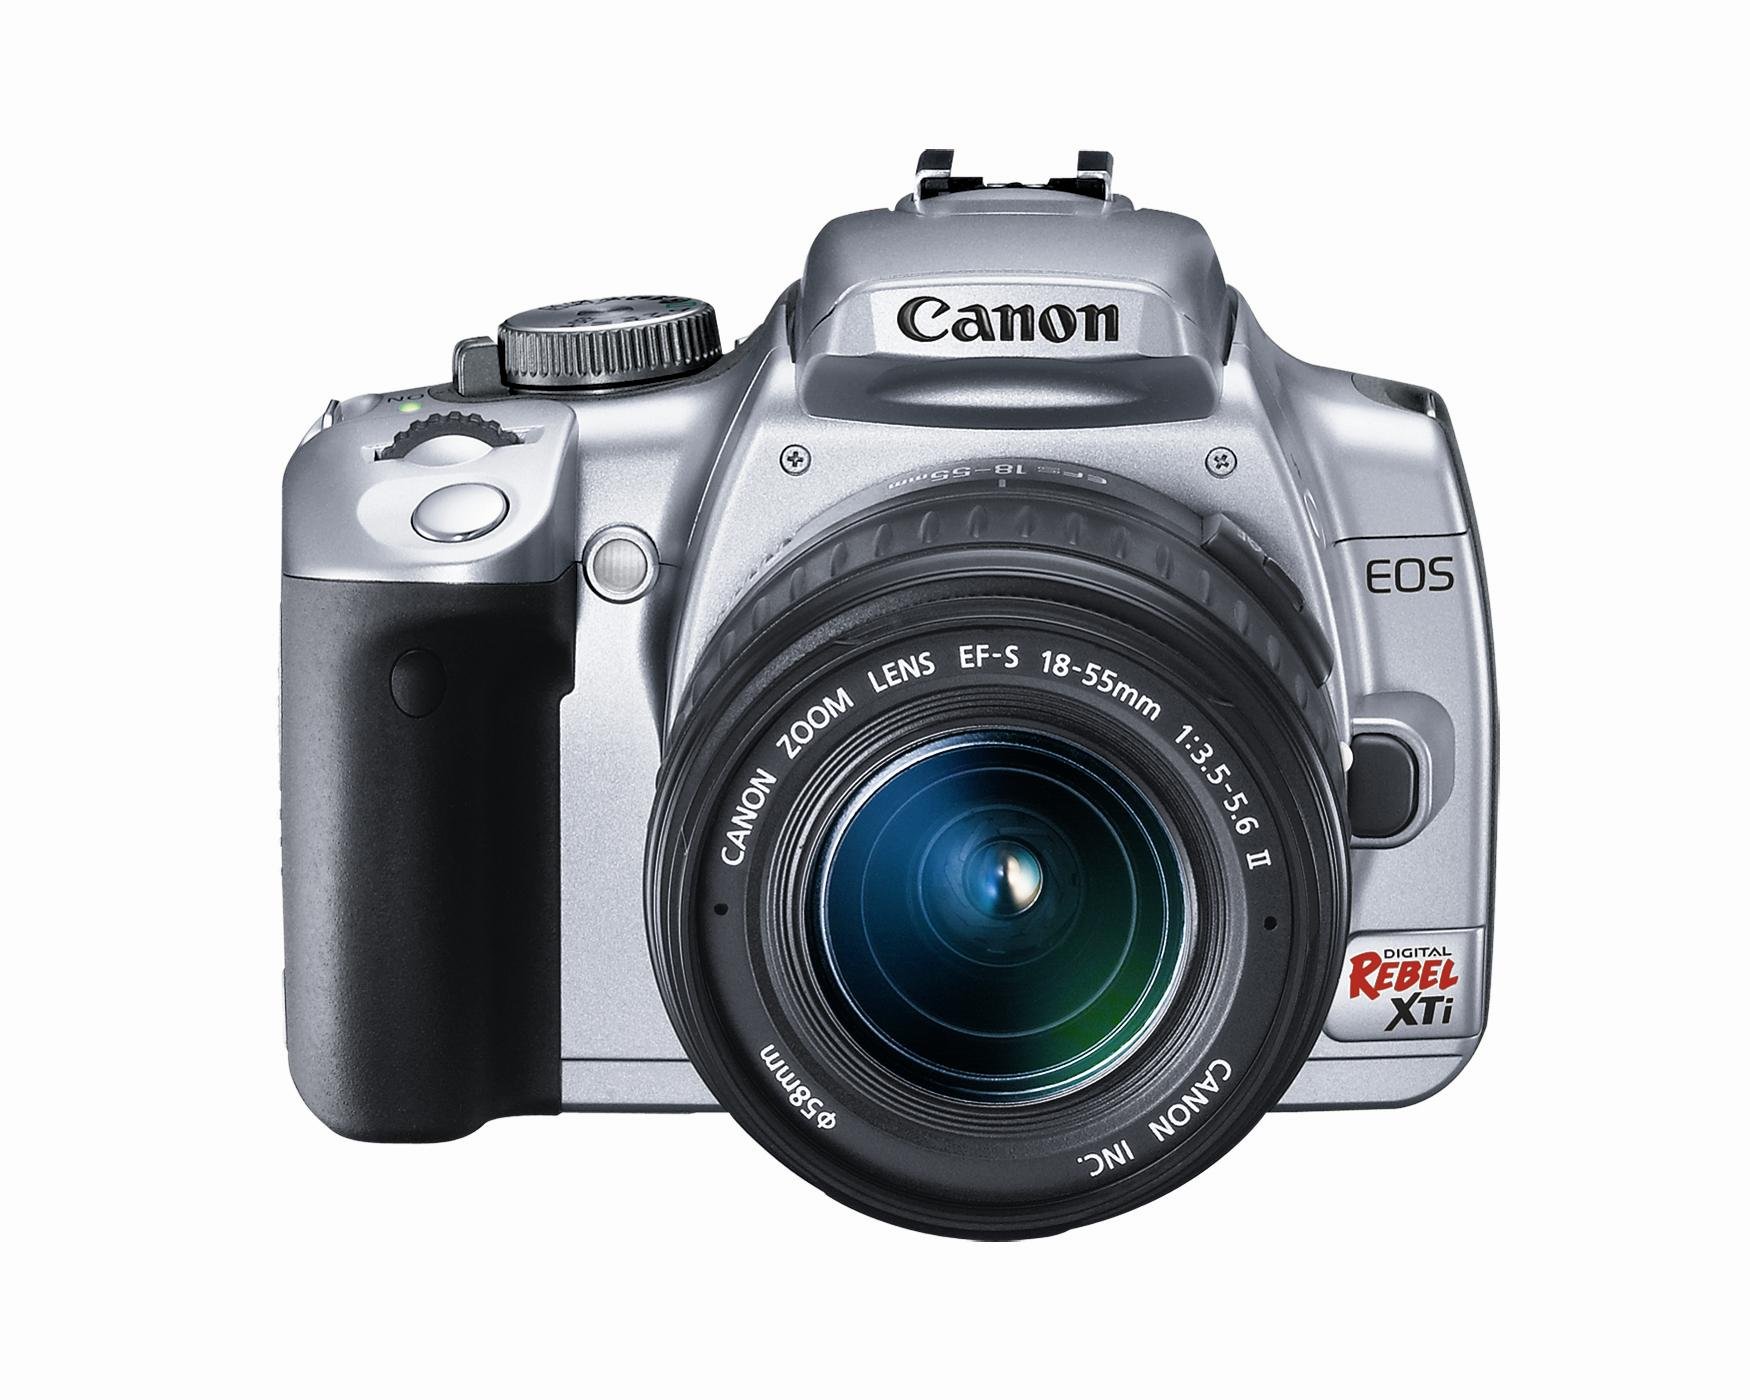 How Old Is The Canon Rebel XTi DSLR Camera With EF-S 18-55mm F/3.5-5.6 Lens